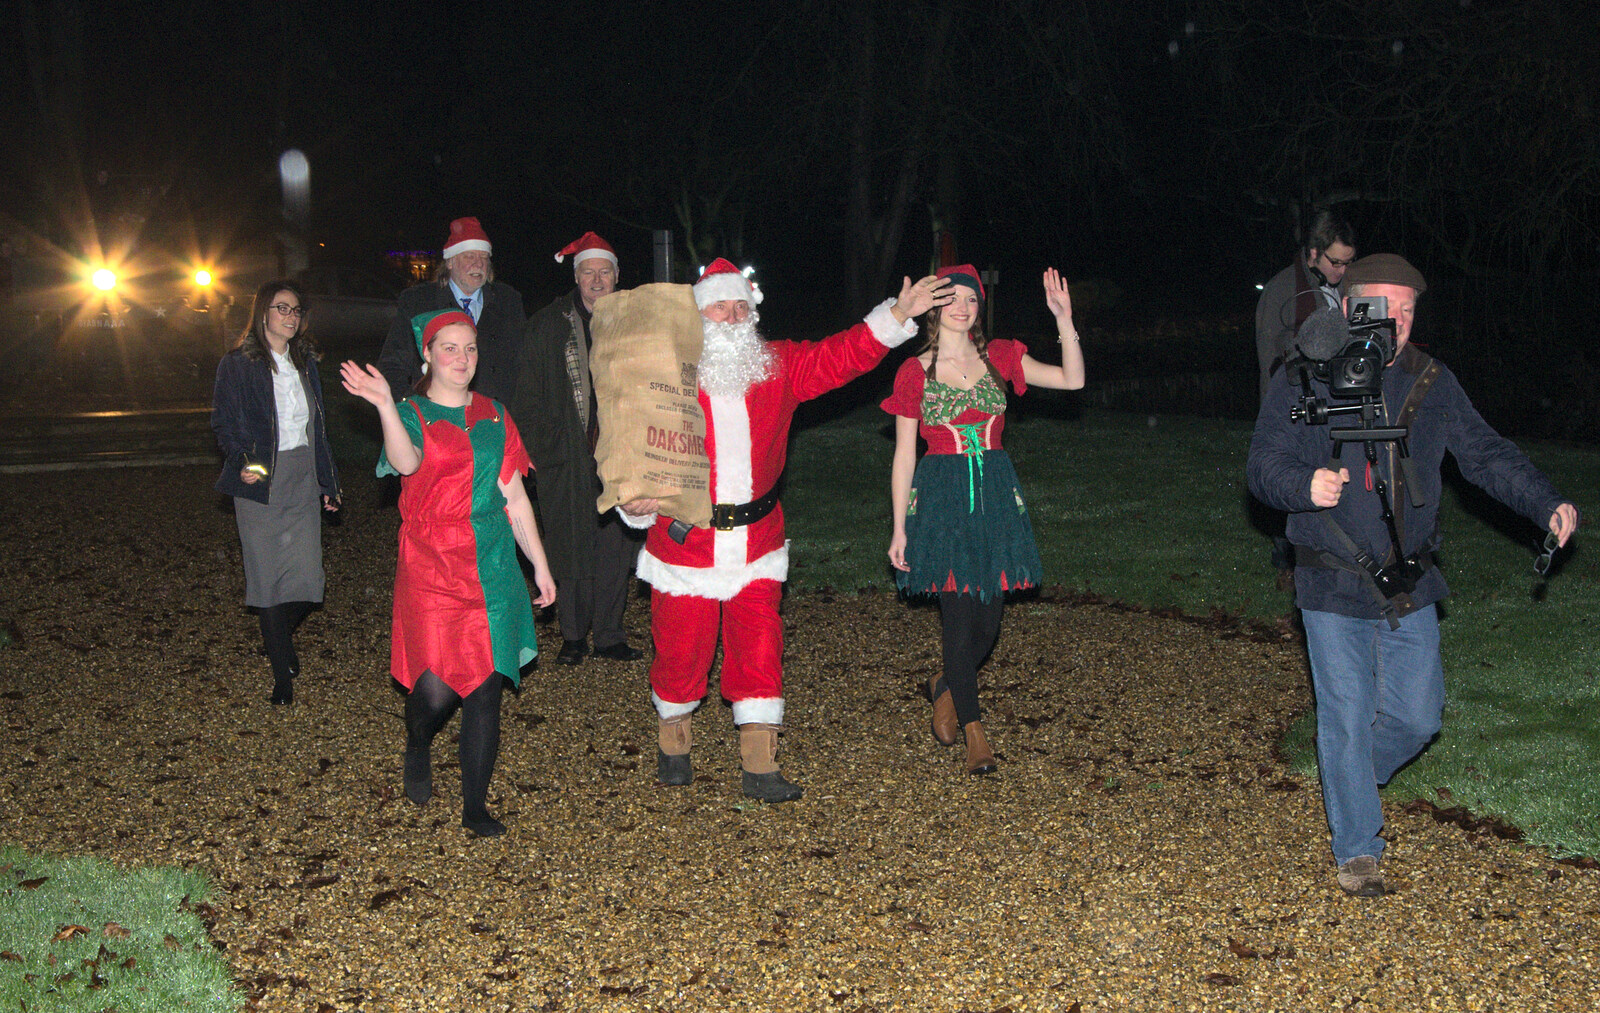 Santa walks up the path from Rick Wakeman, Ian Lavender and the Christmas lights, The Oaksmere, Suffolk - 4th December 2014